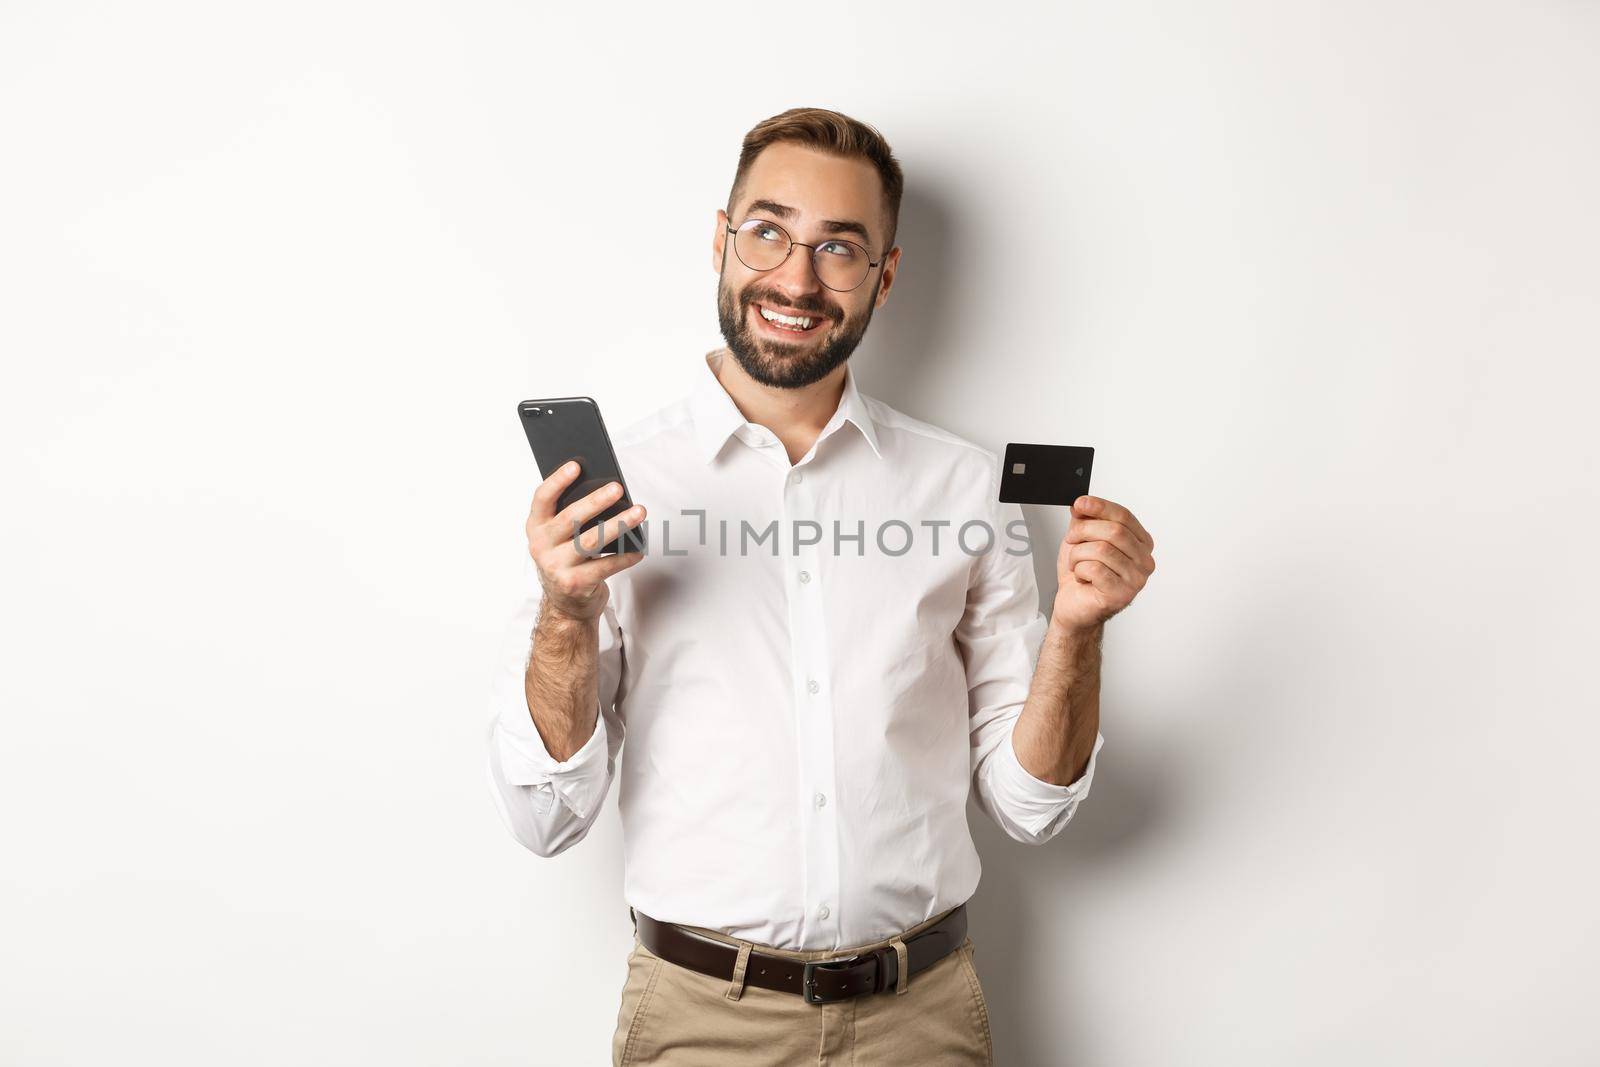 Business and online payment. Image of handsome man thinking while holding credit card and smartphone, standing against white background.